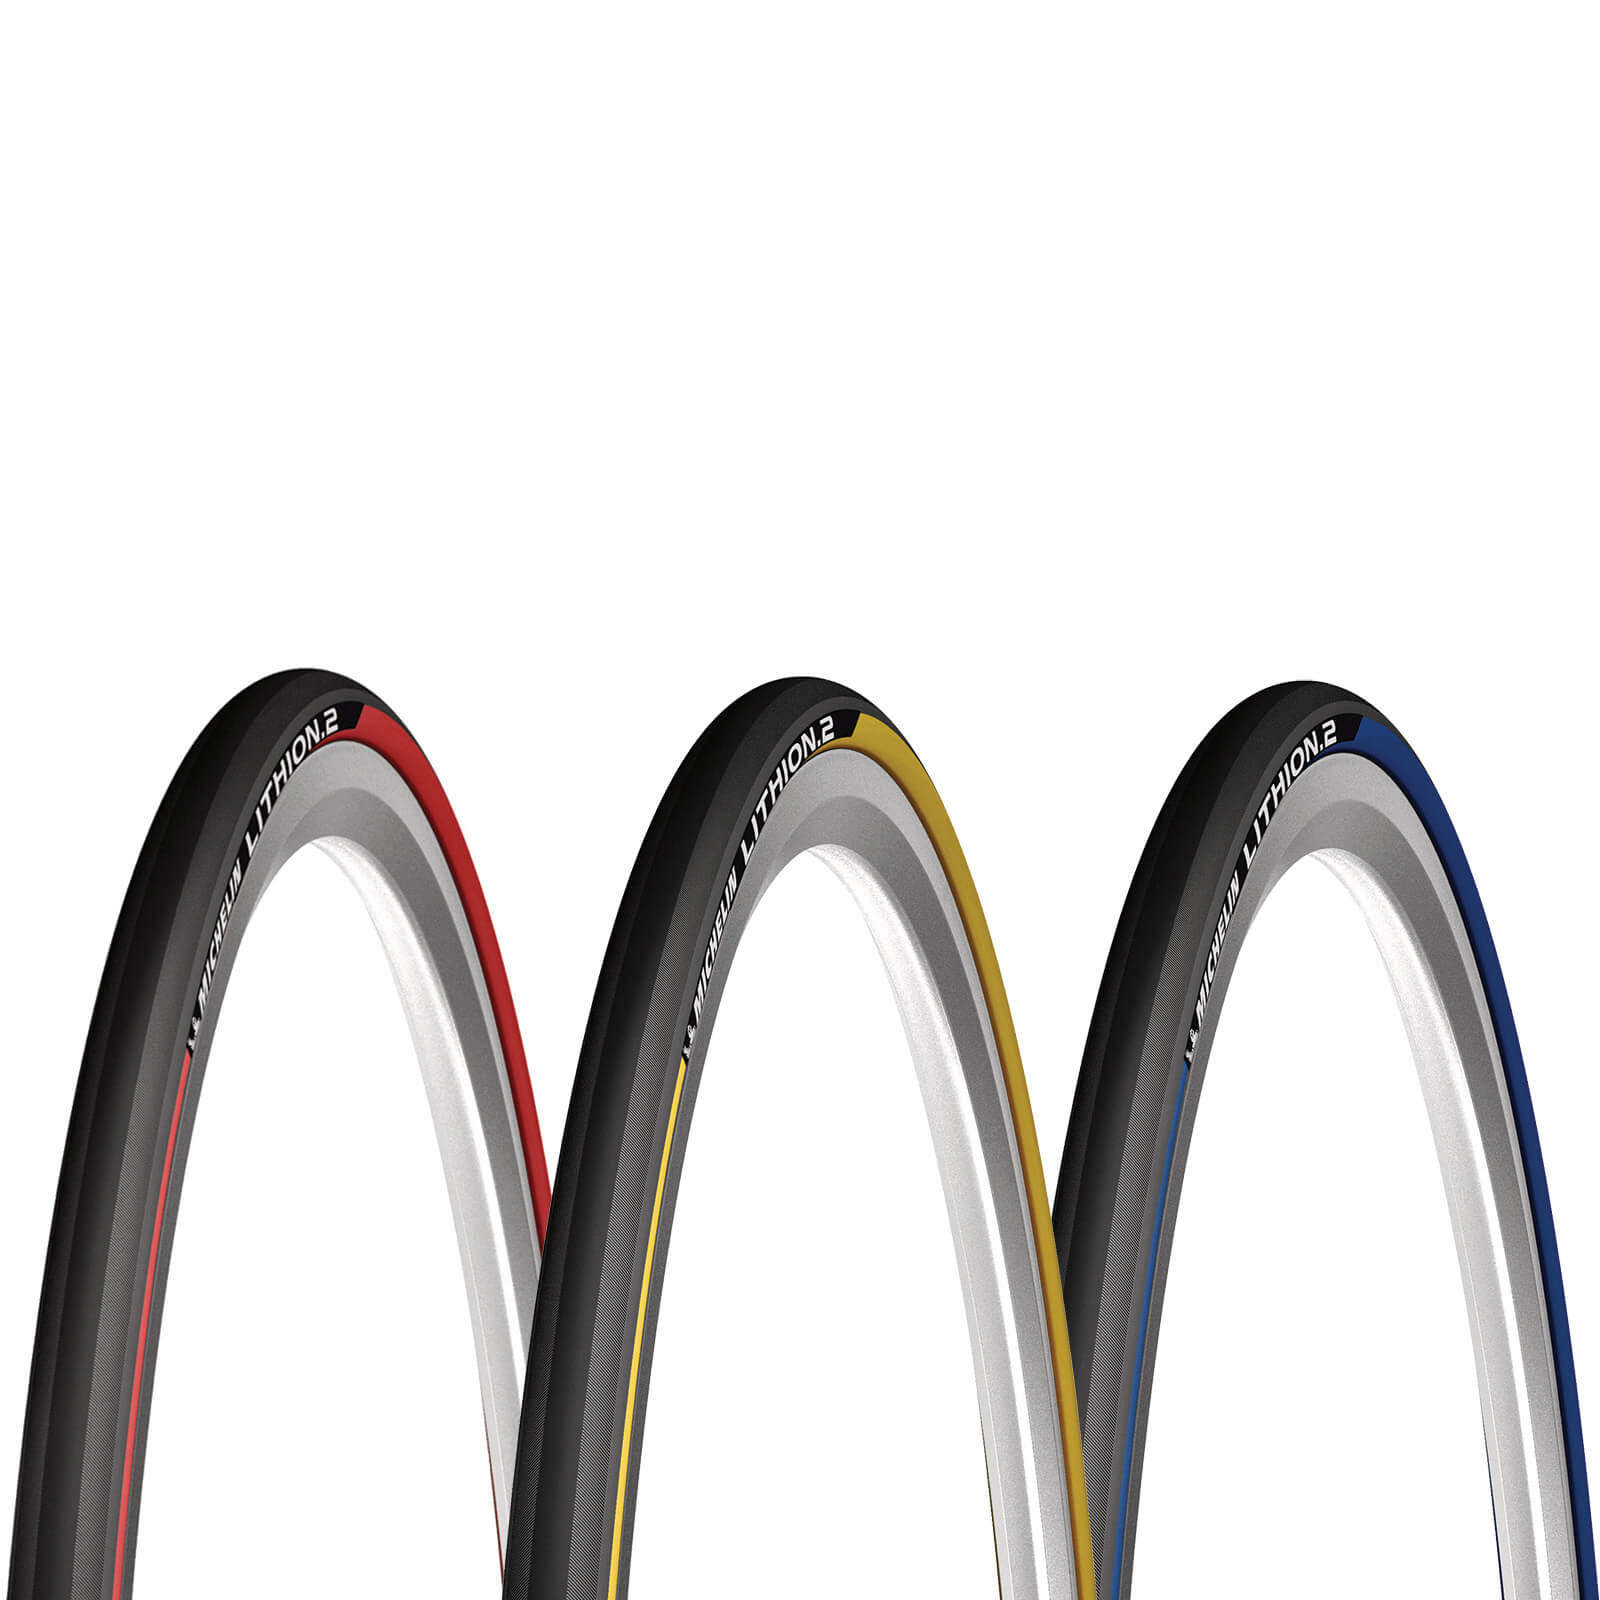 michelin lithion 2 folding road tyre